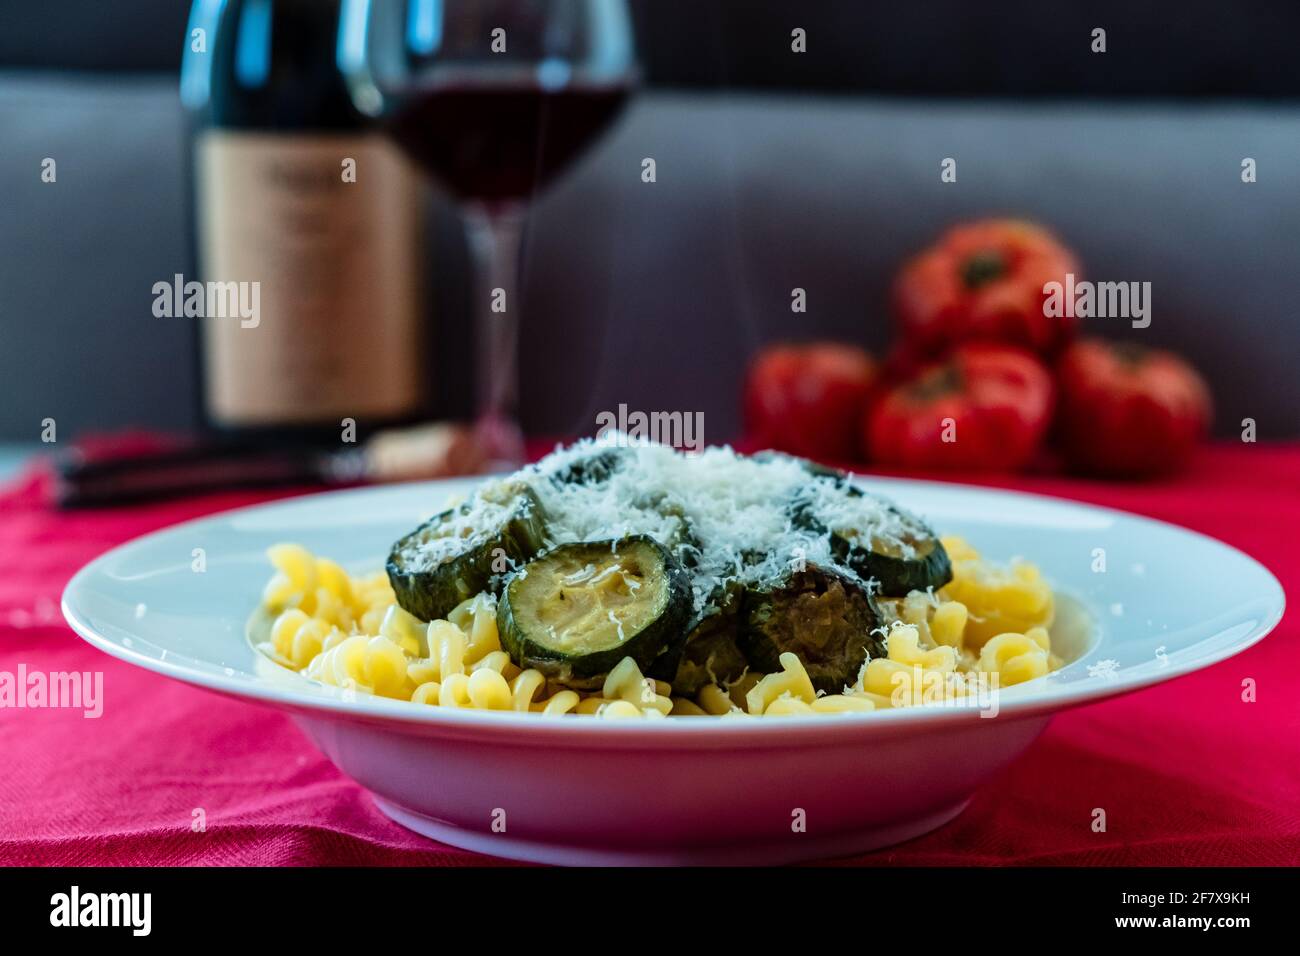 Pasta with zucchini on an italian table Stock Photo